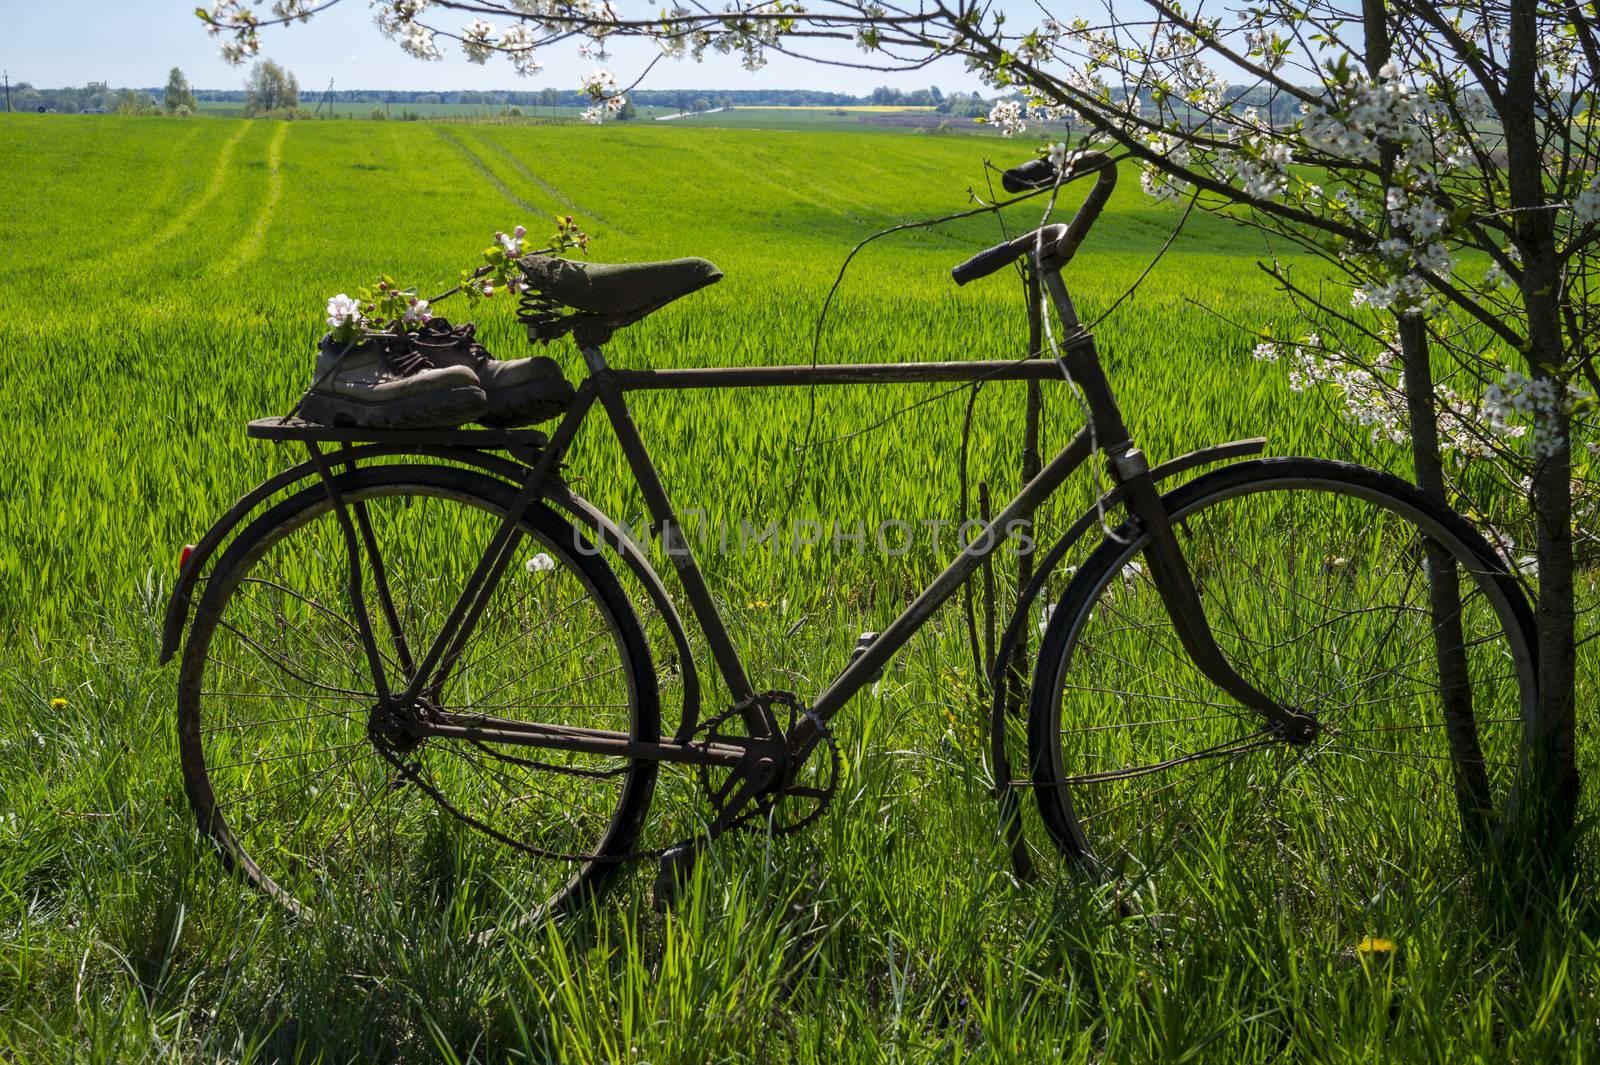 Old bicycle with pair of hiking boots in a garden by NetPix